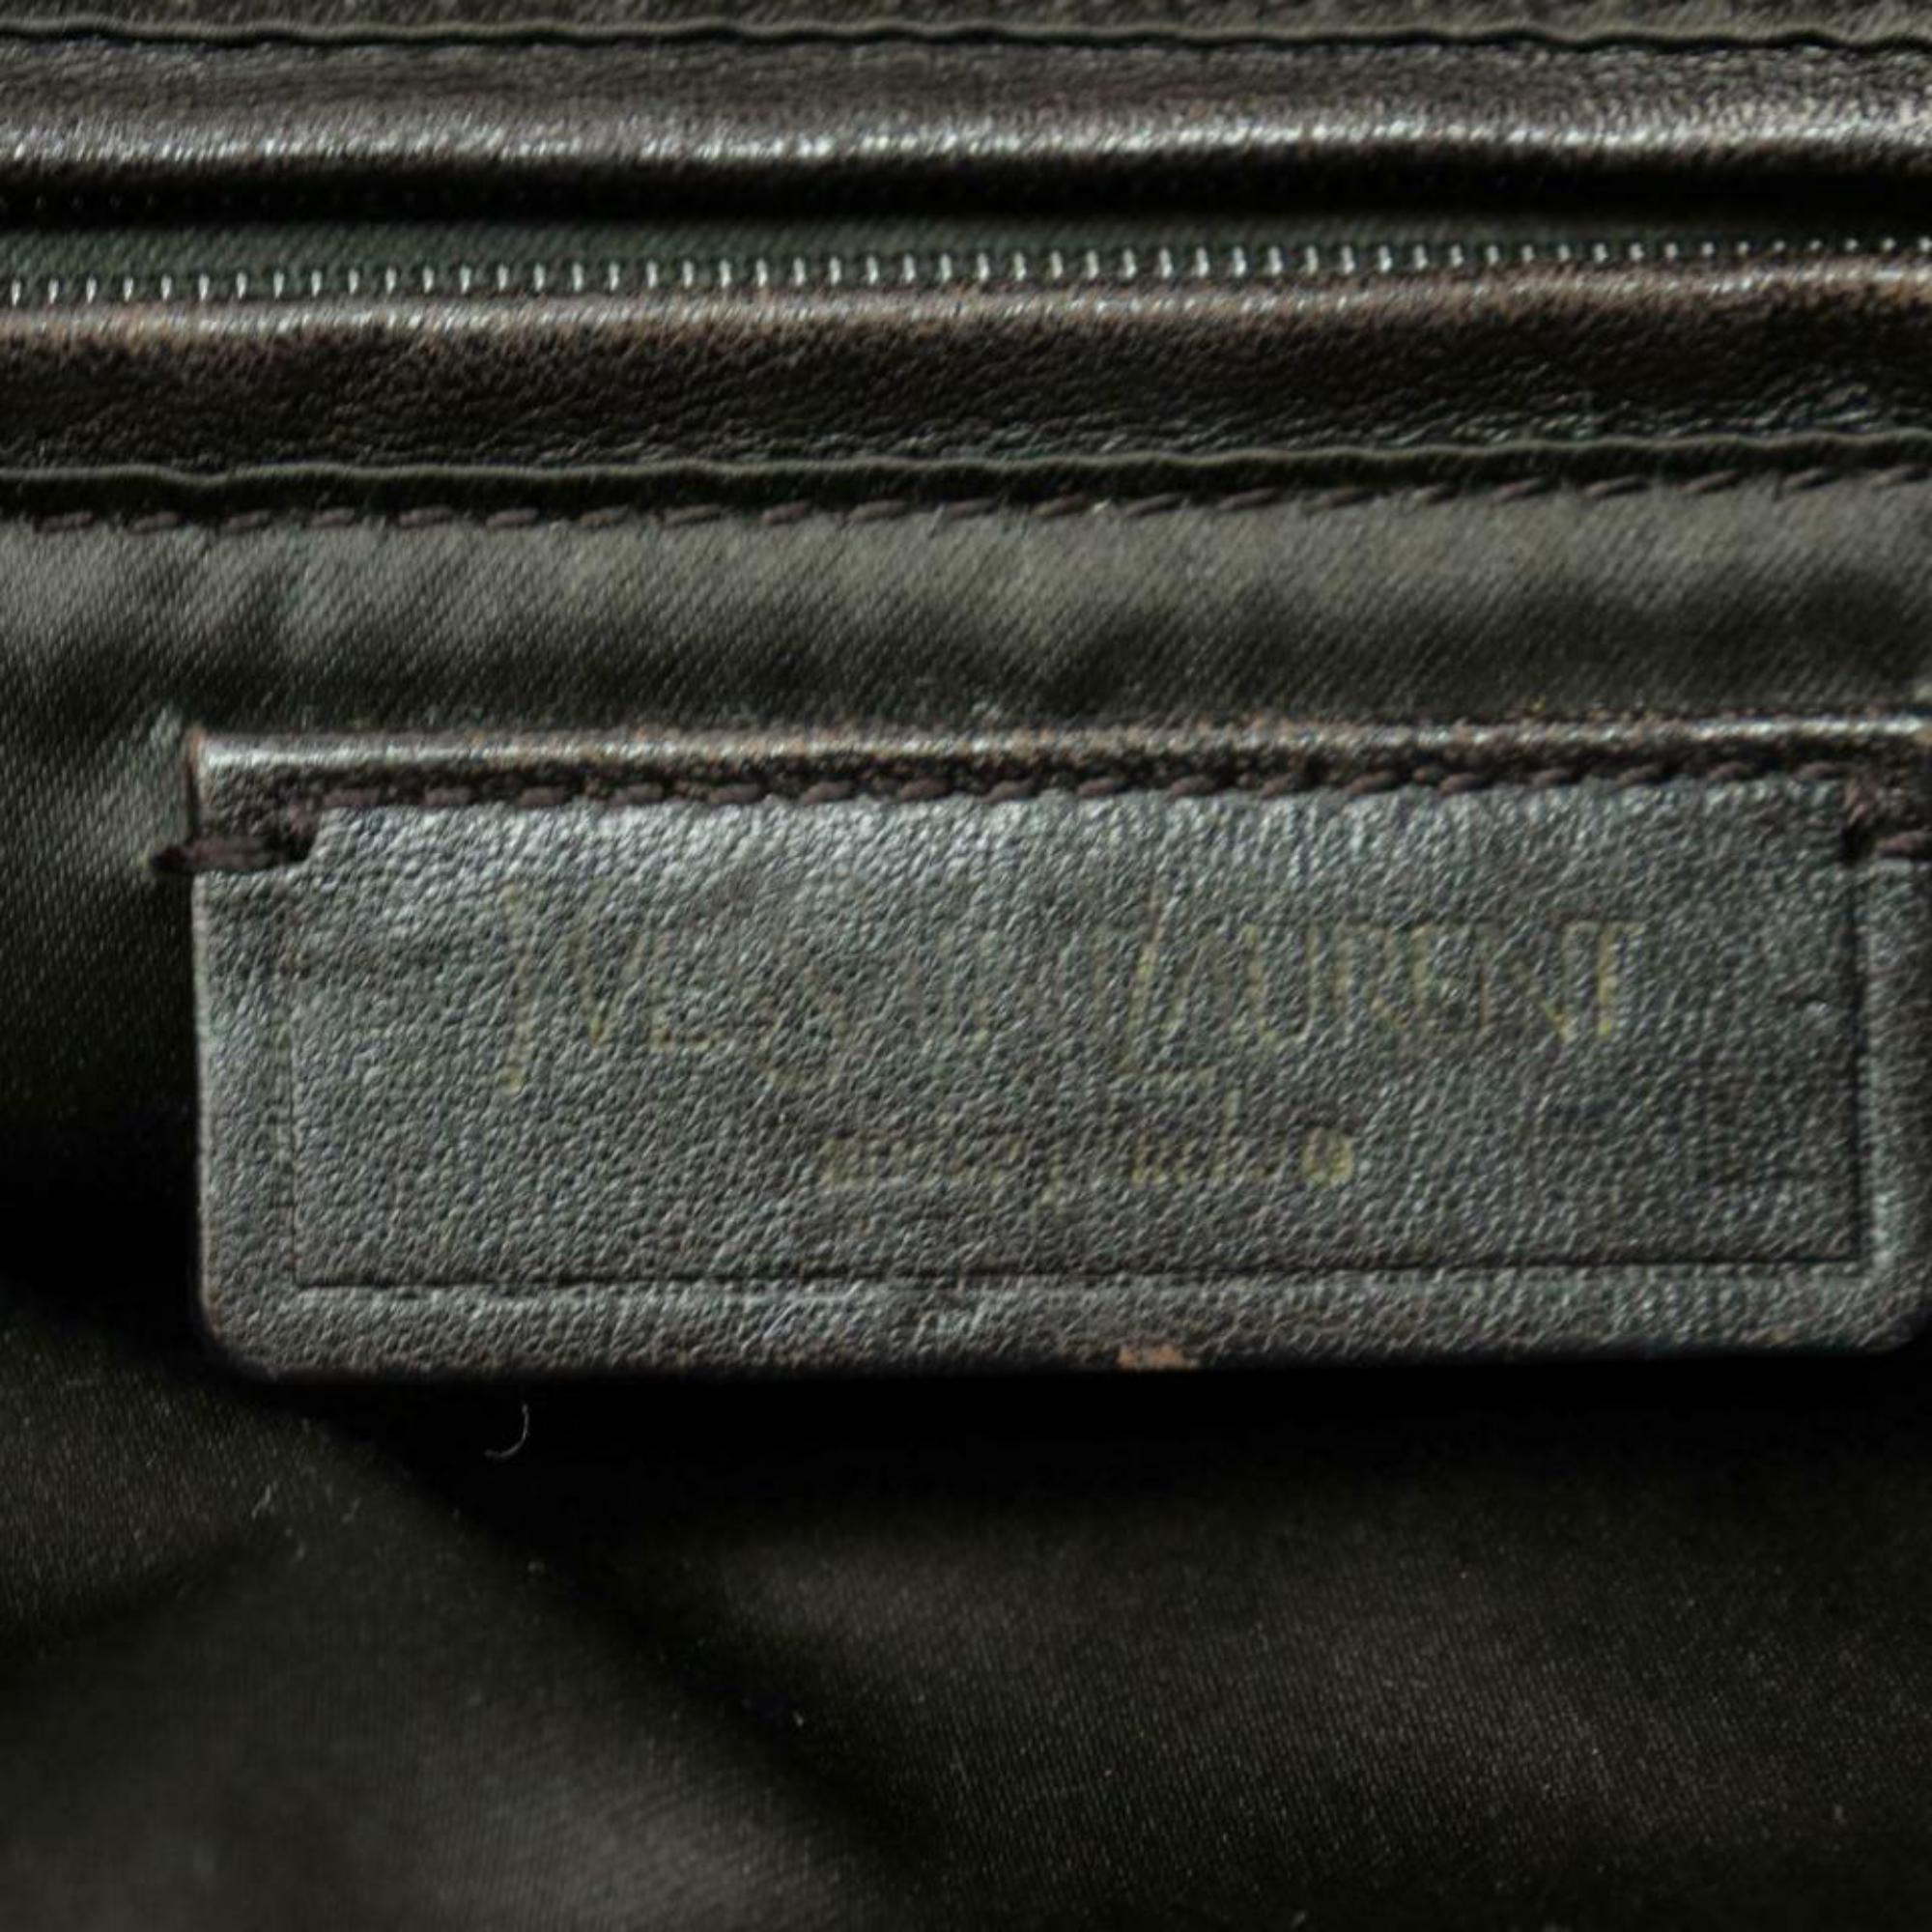 Saint Laurent Dark Bicolor Monogram Ysl Kahala 870200 Brown Canvas Tote In Good Condition For Sale In Forest Hills, NY